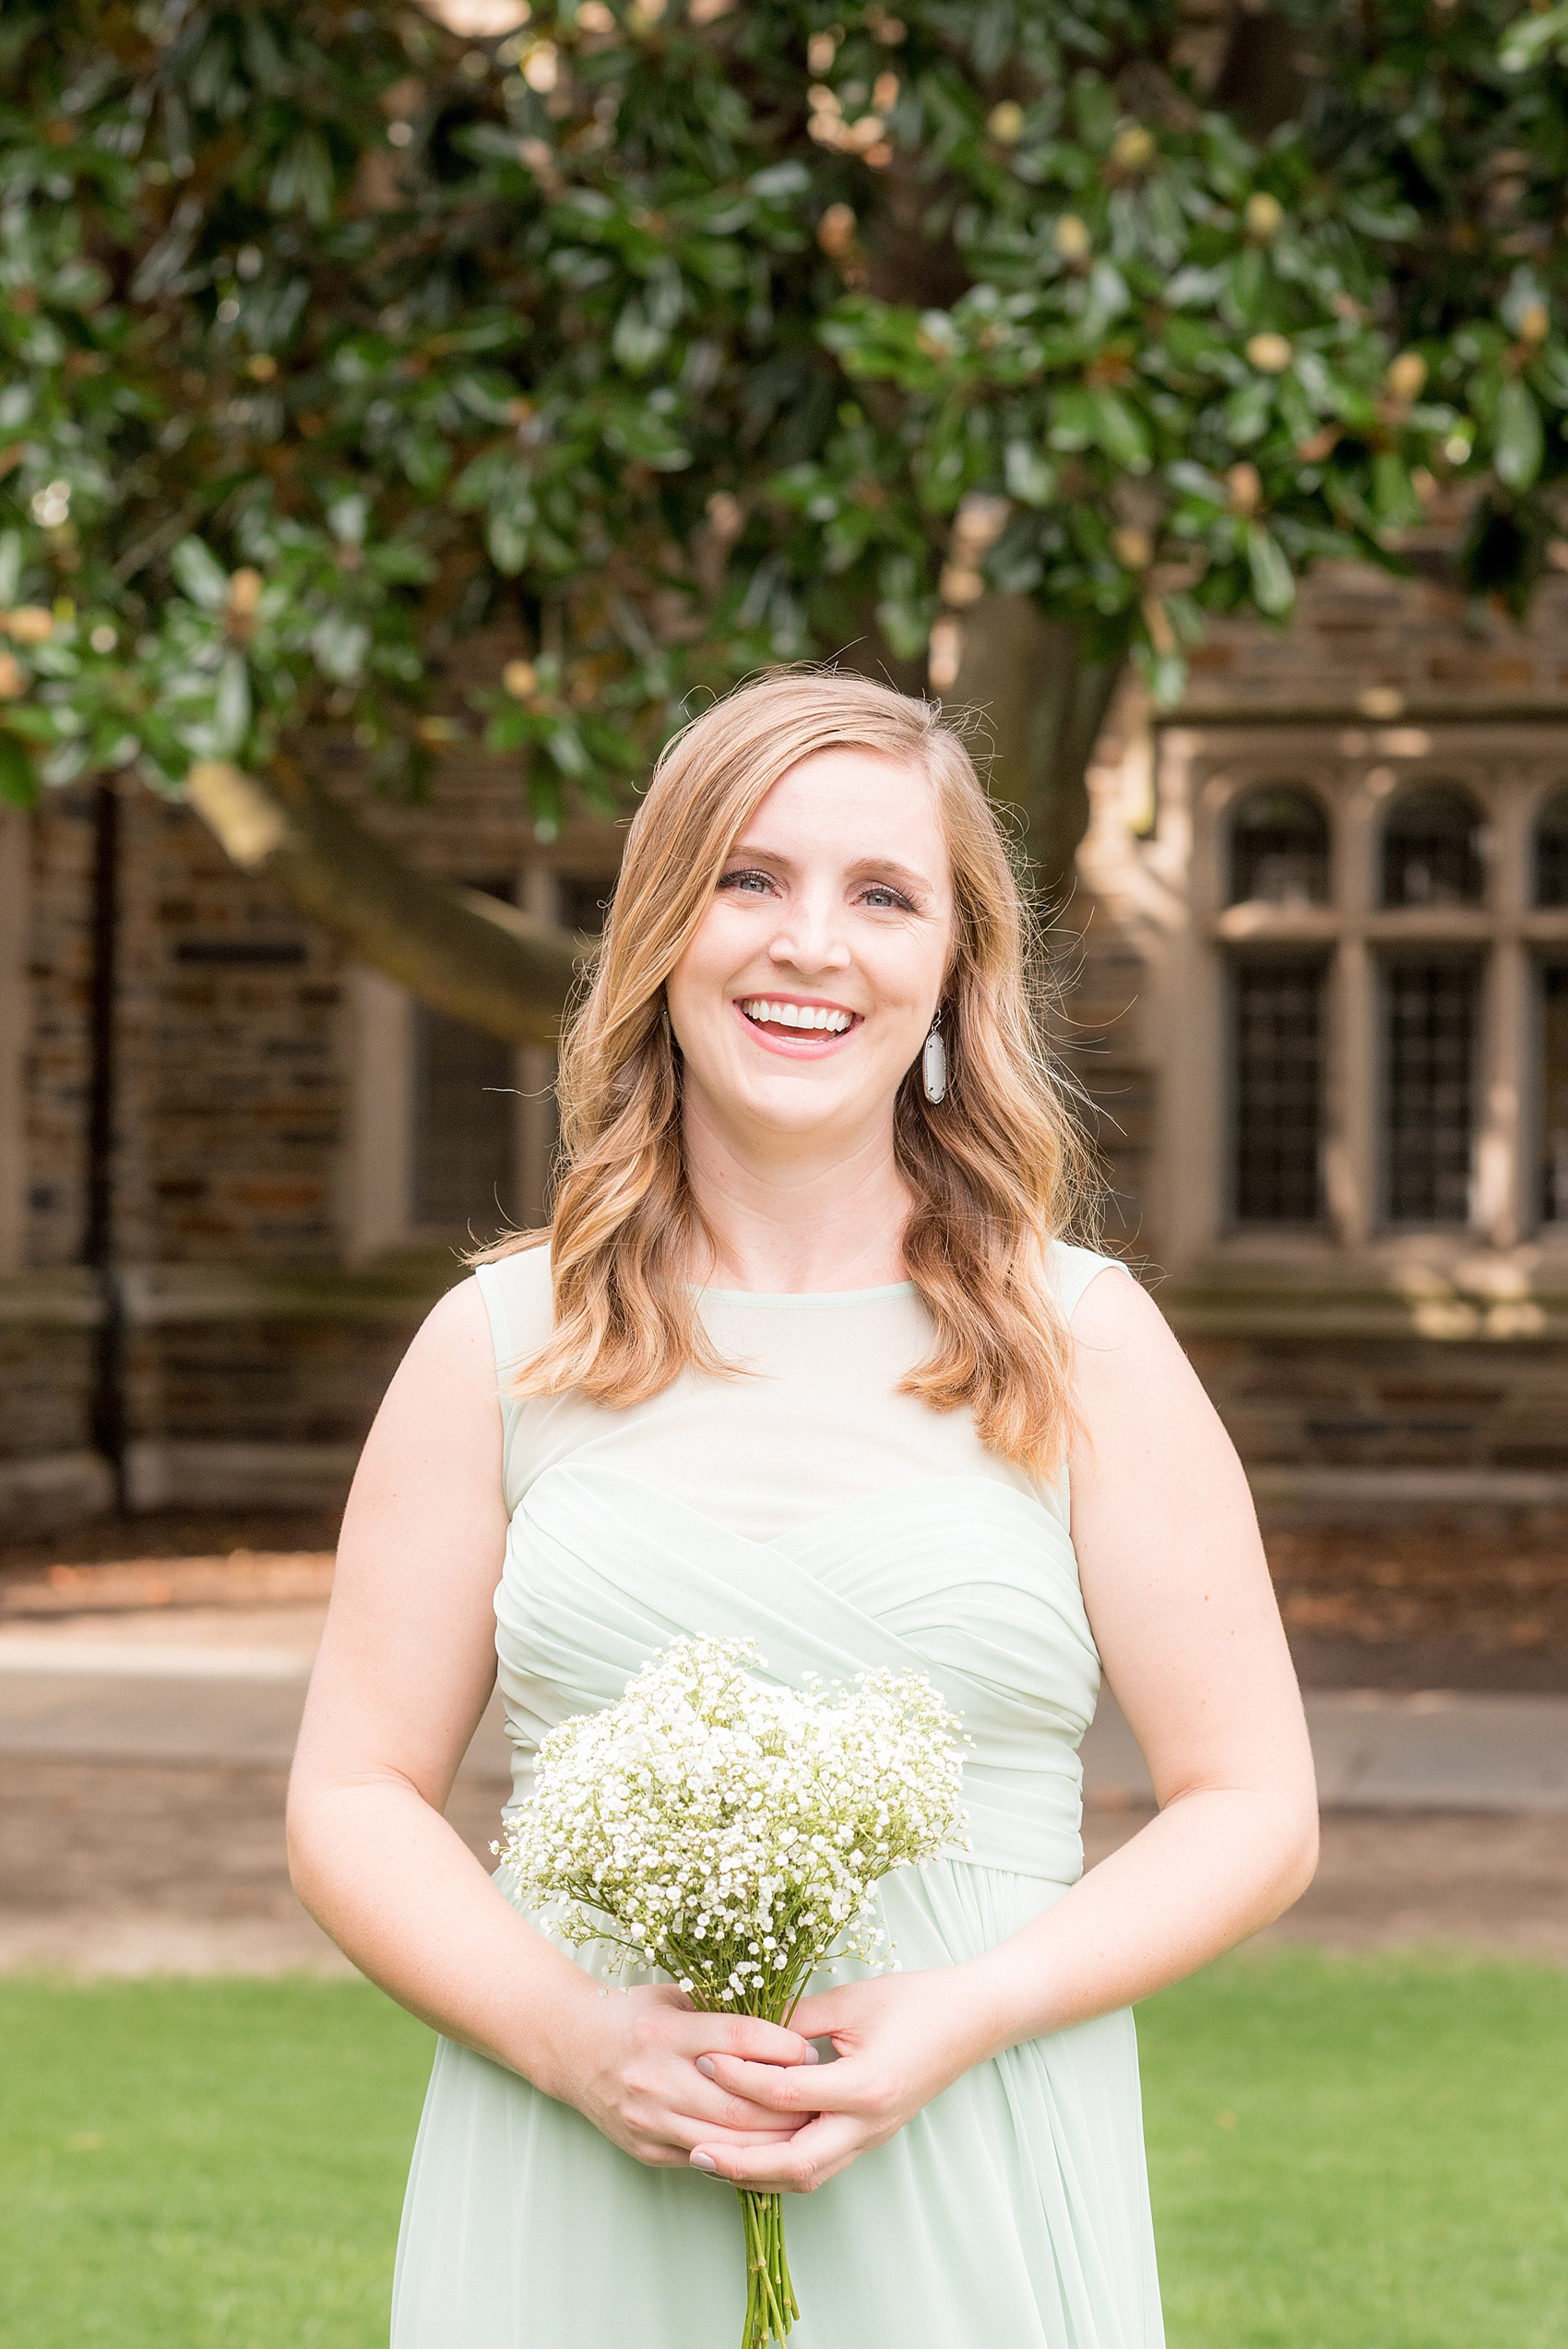 Mikkel Paige Photography photo of a Duke Chapel wedding in Durham, North Carolina. A bridesmaid in a mint green gown.